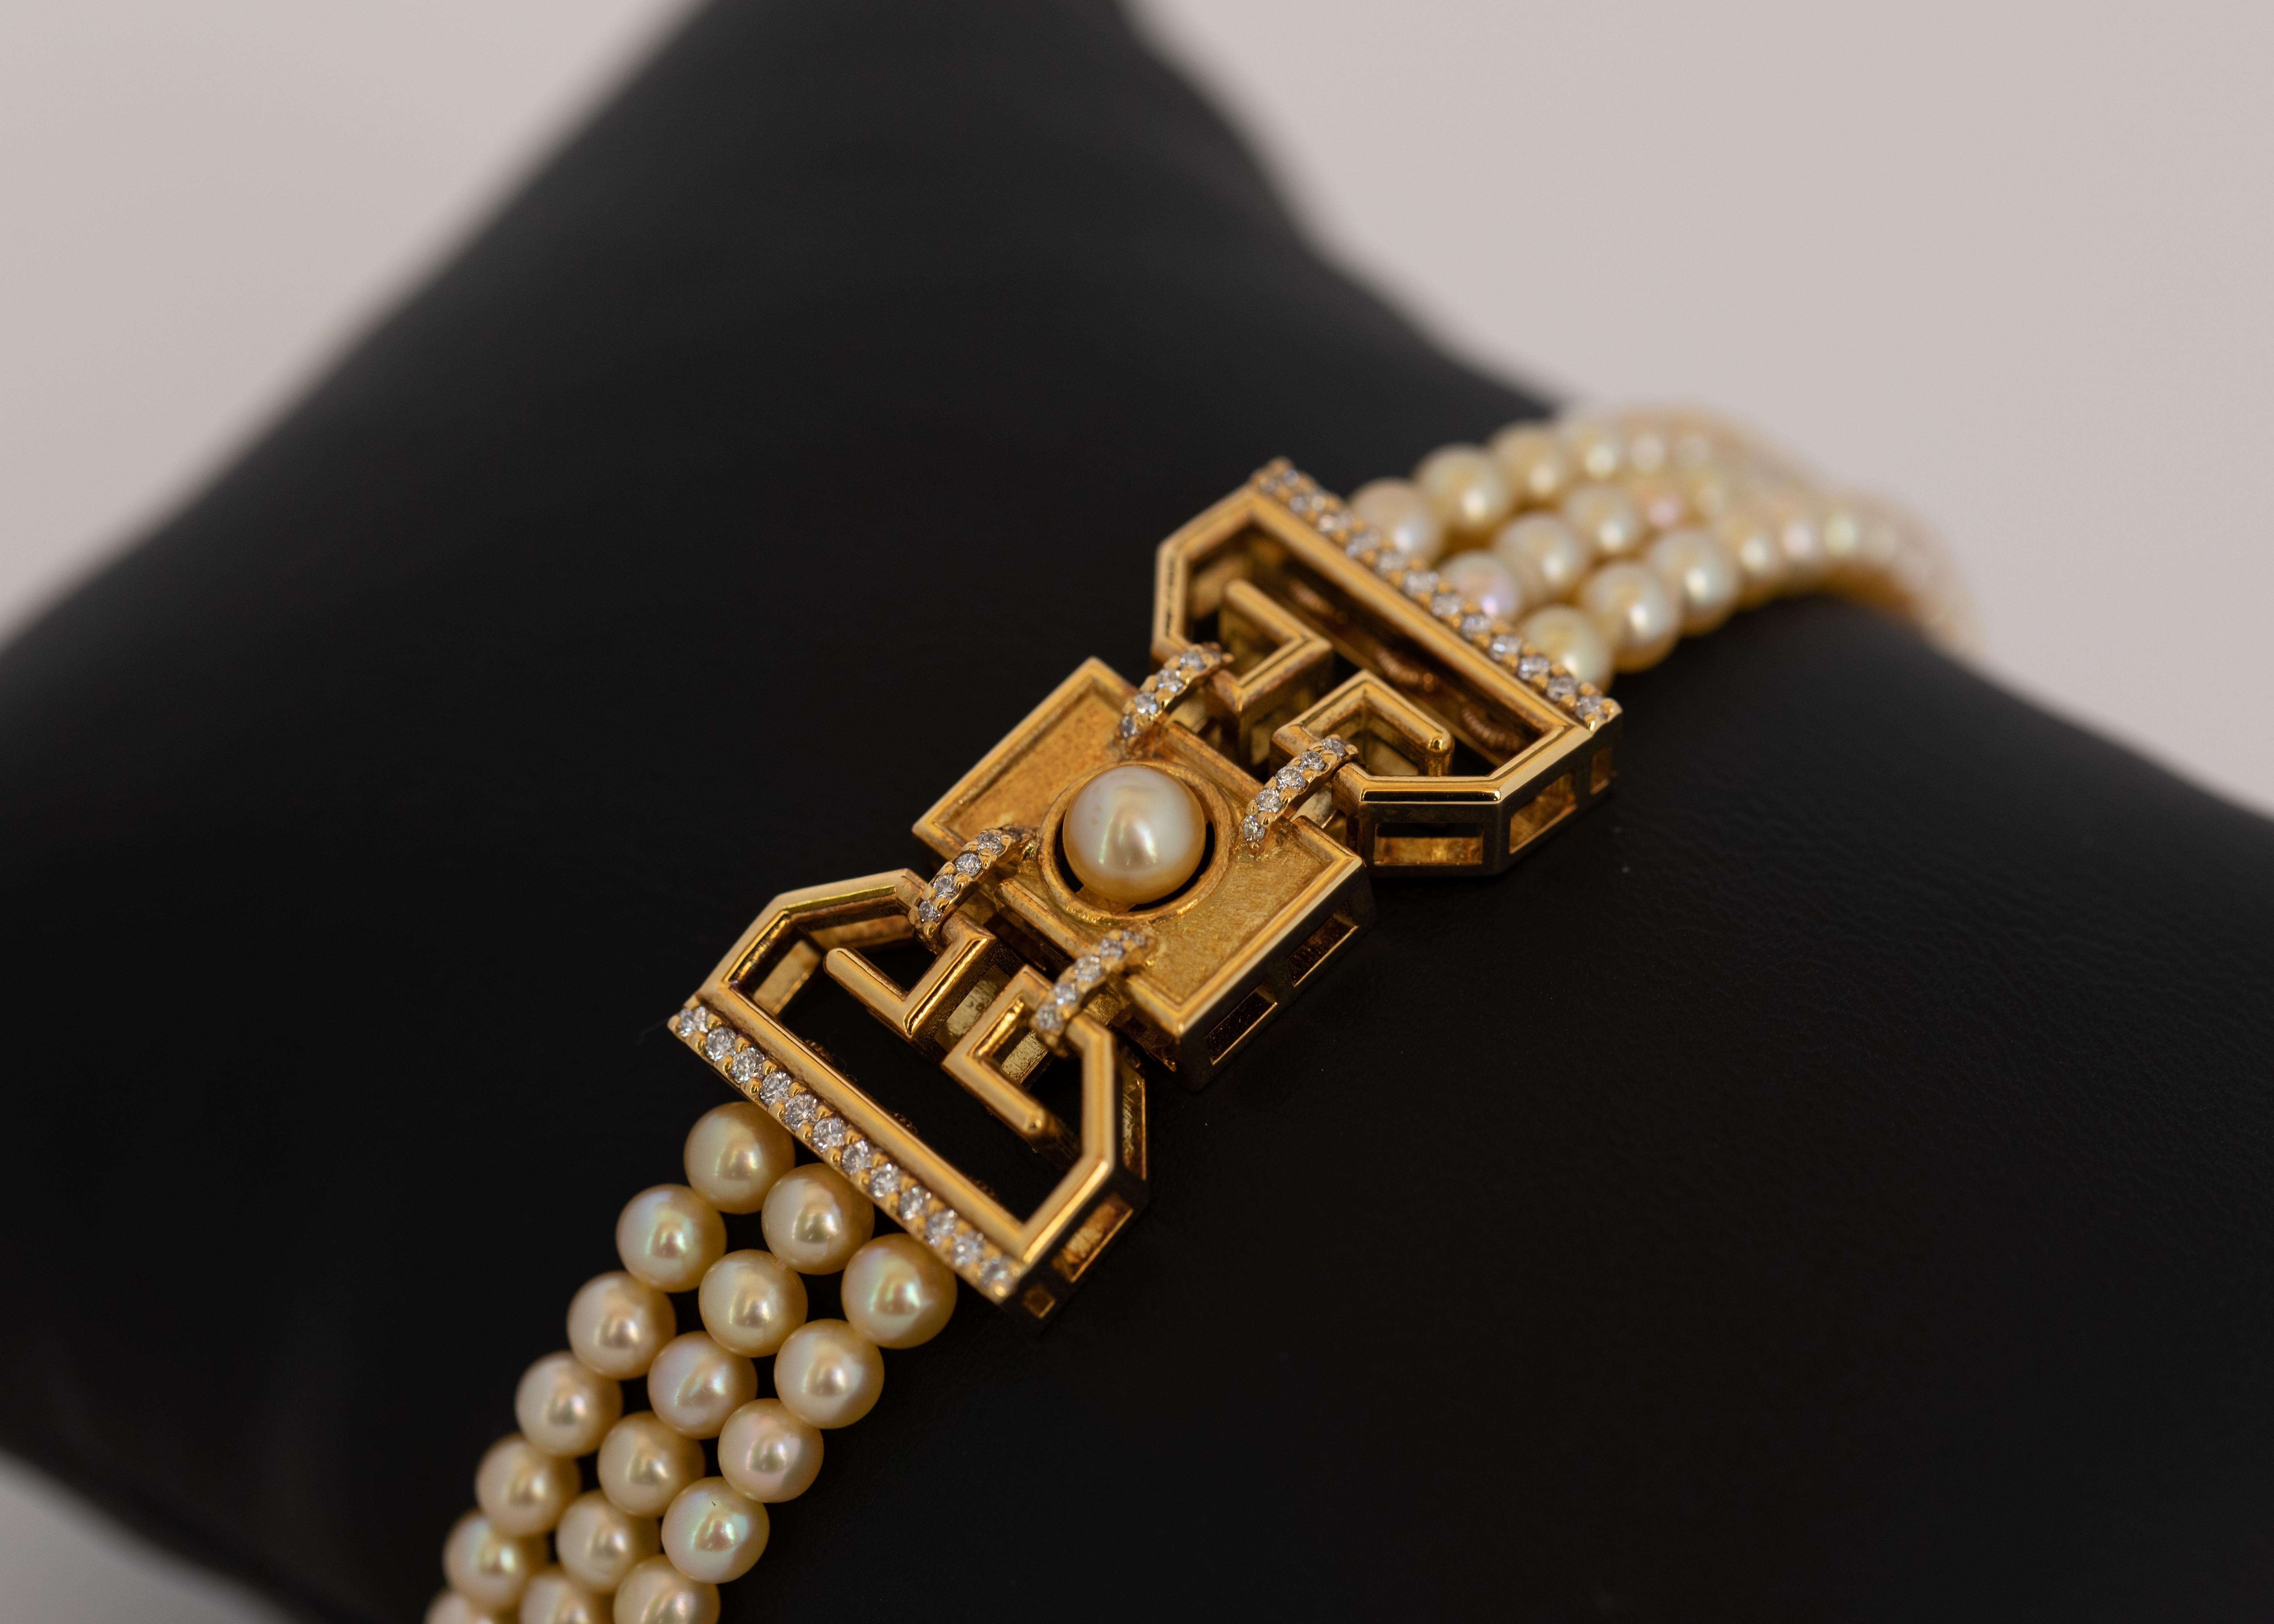 3 rows of near round certified dark cream Bahraini natural pearls separated by an 18 karat yellow gold art deco piece.
The motif combines glossy and matte gold with diamond studded edges and a lustrous pearl button in the center.

The bracelet is